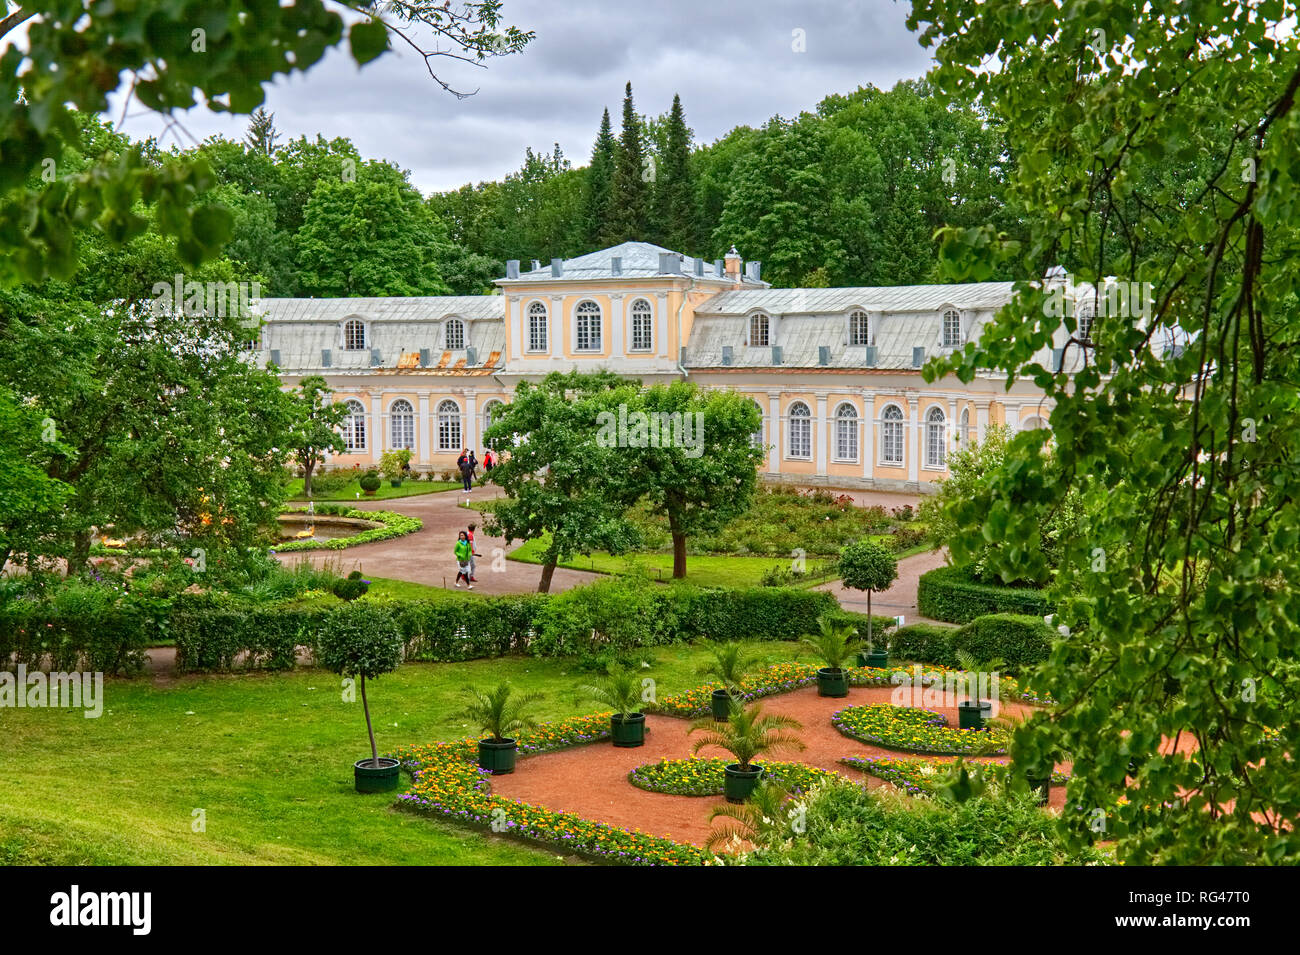 July 1, 2018: St. Petersburg, Russia: Looking through the summer green trees at the white and yellow building that houses a restaurant in Peterhof's g Stock Photo